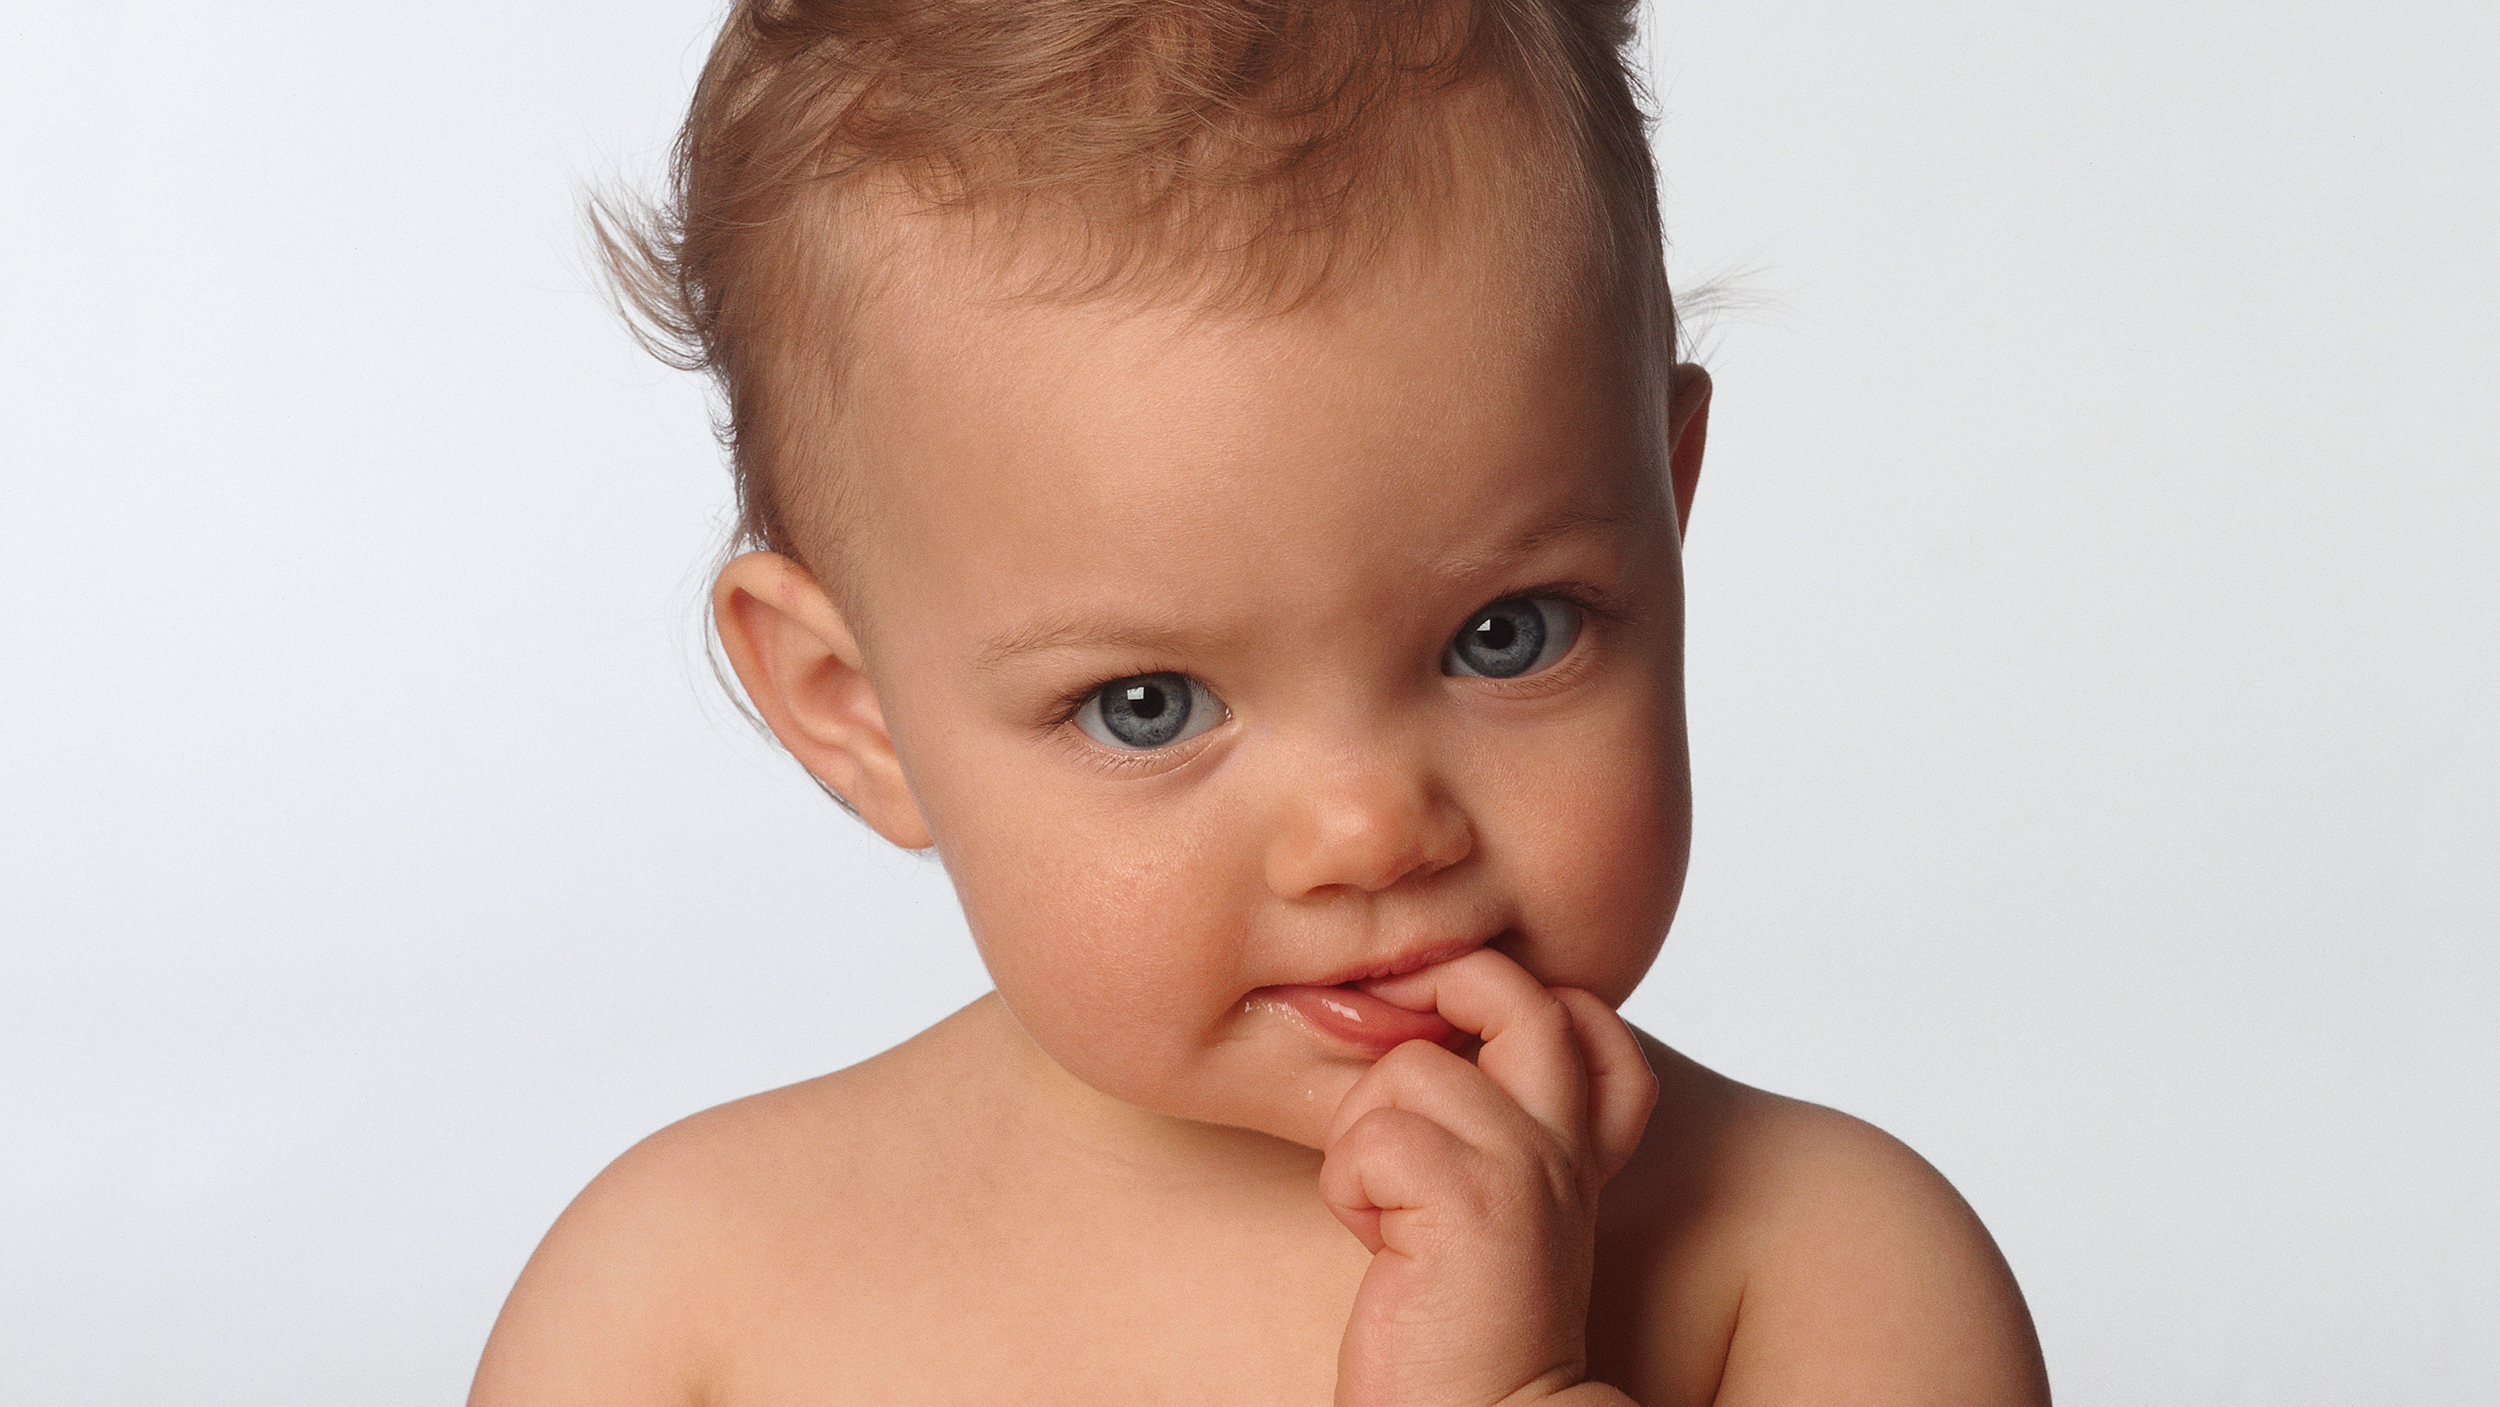 The 22 most outrageous baby names of 2013: Rarity, Ransom, Subaru and more - TODAY.com2500 x 1407